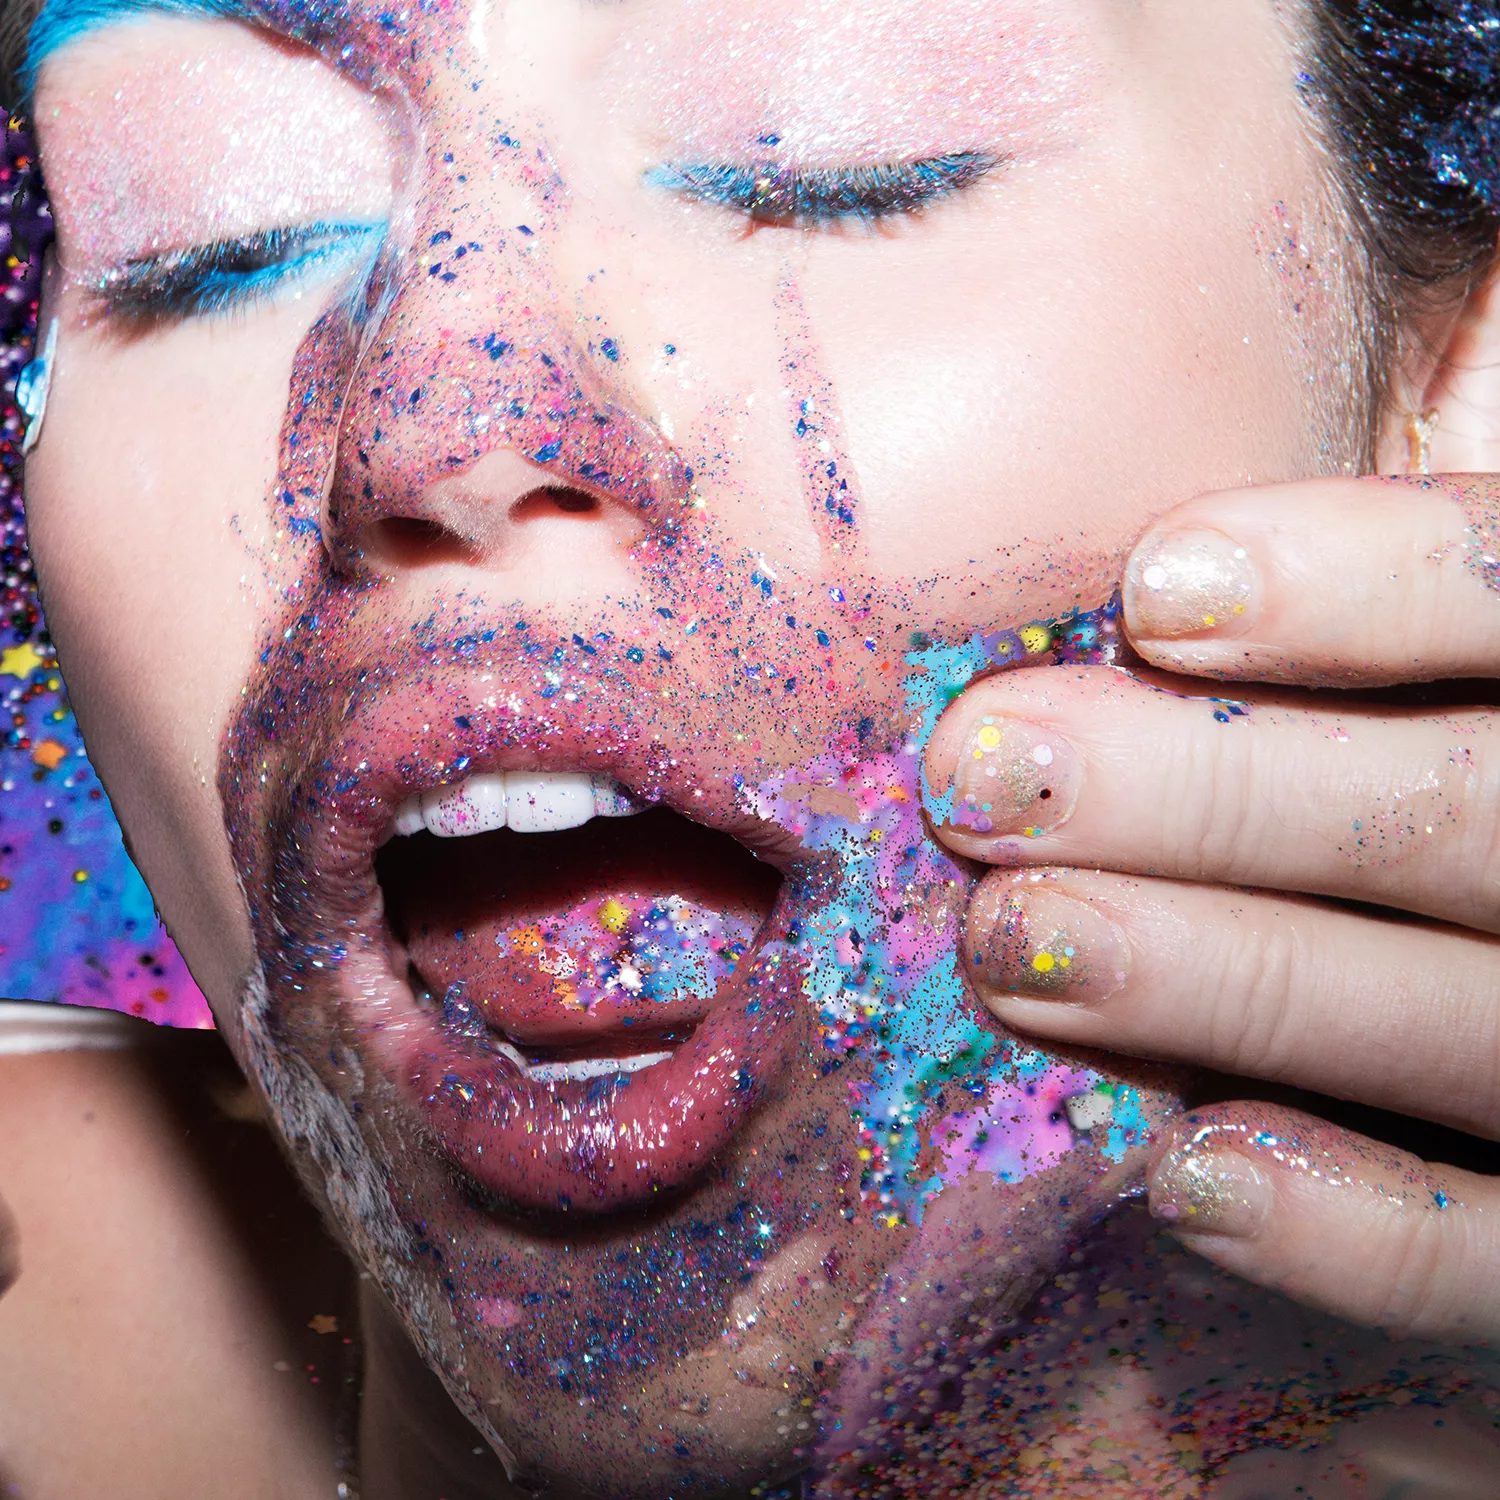 And Her Dead Petz - Miley Cyrus